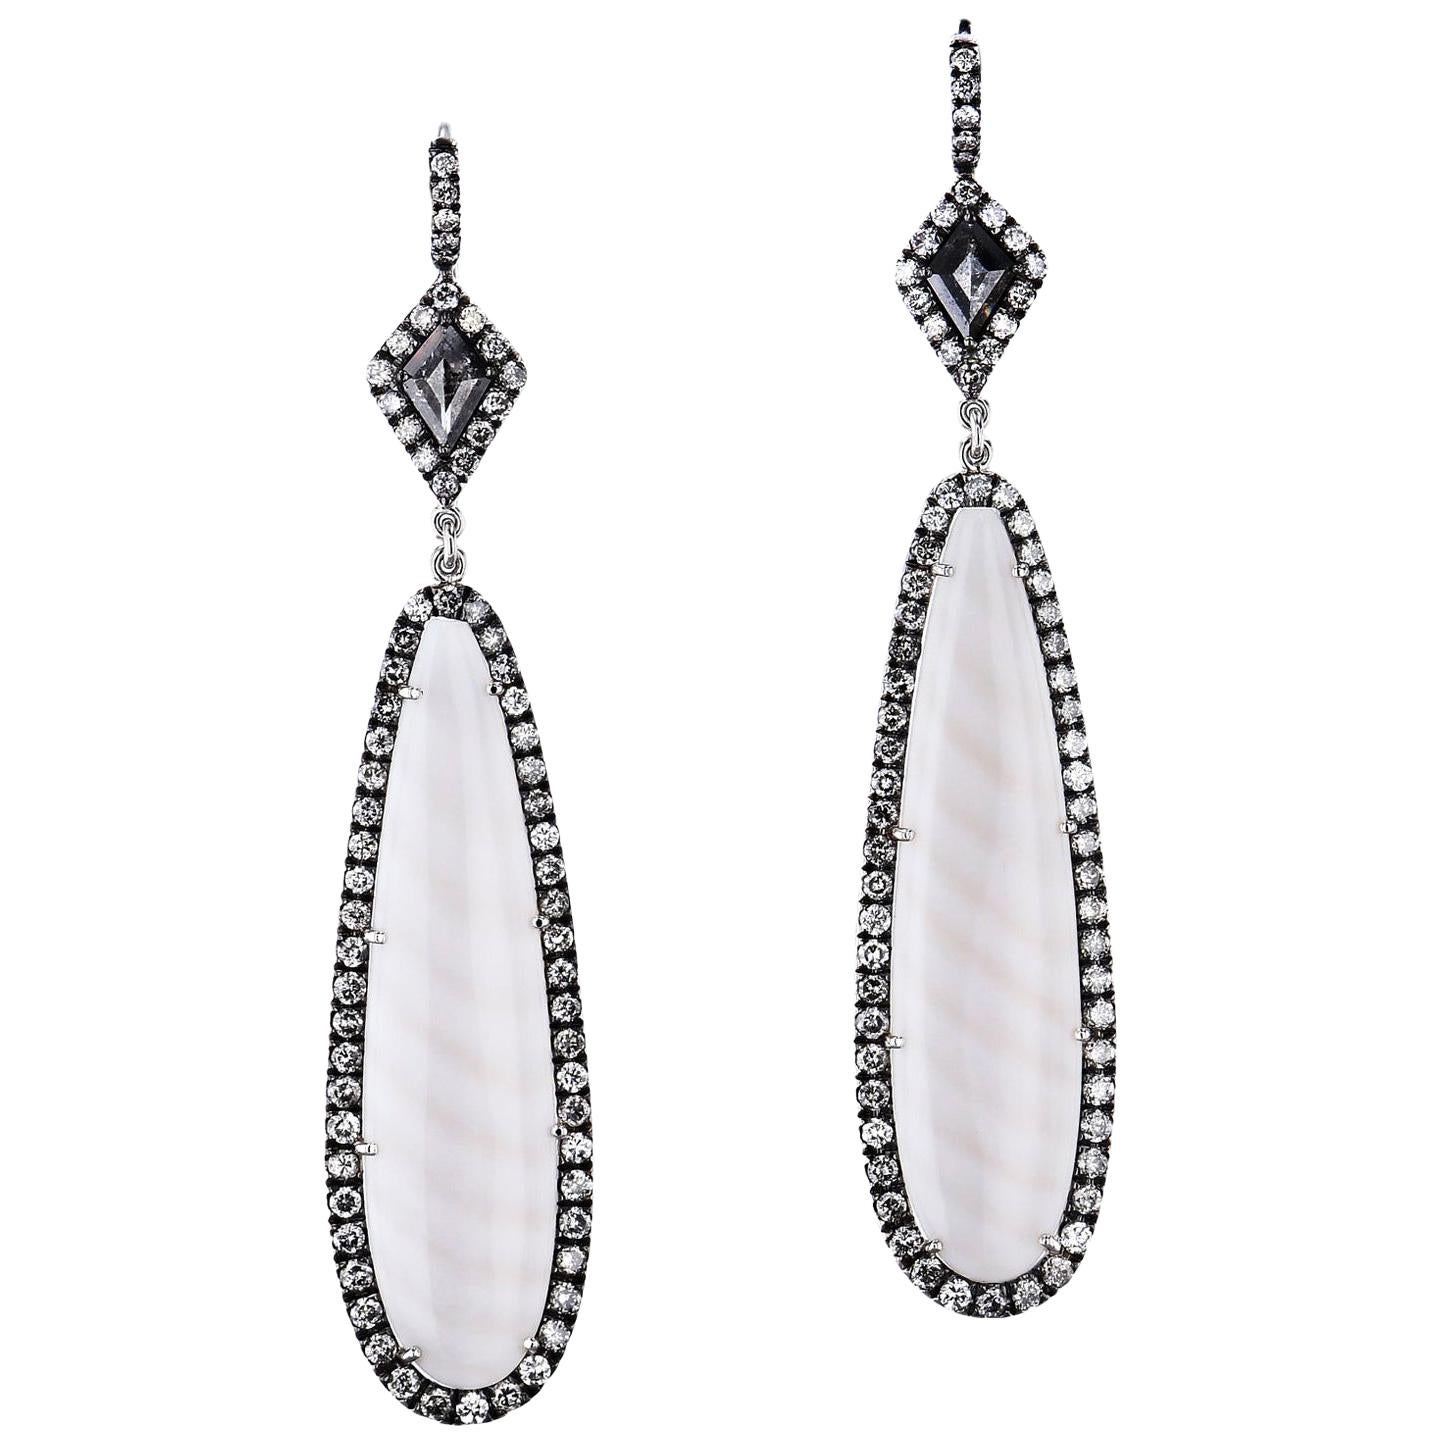 Striped Madagascar Chalcedony Drop Earrings Natural Black Diamond with Pave